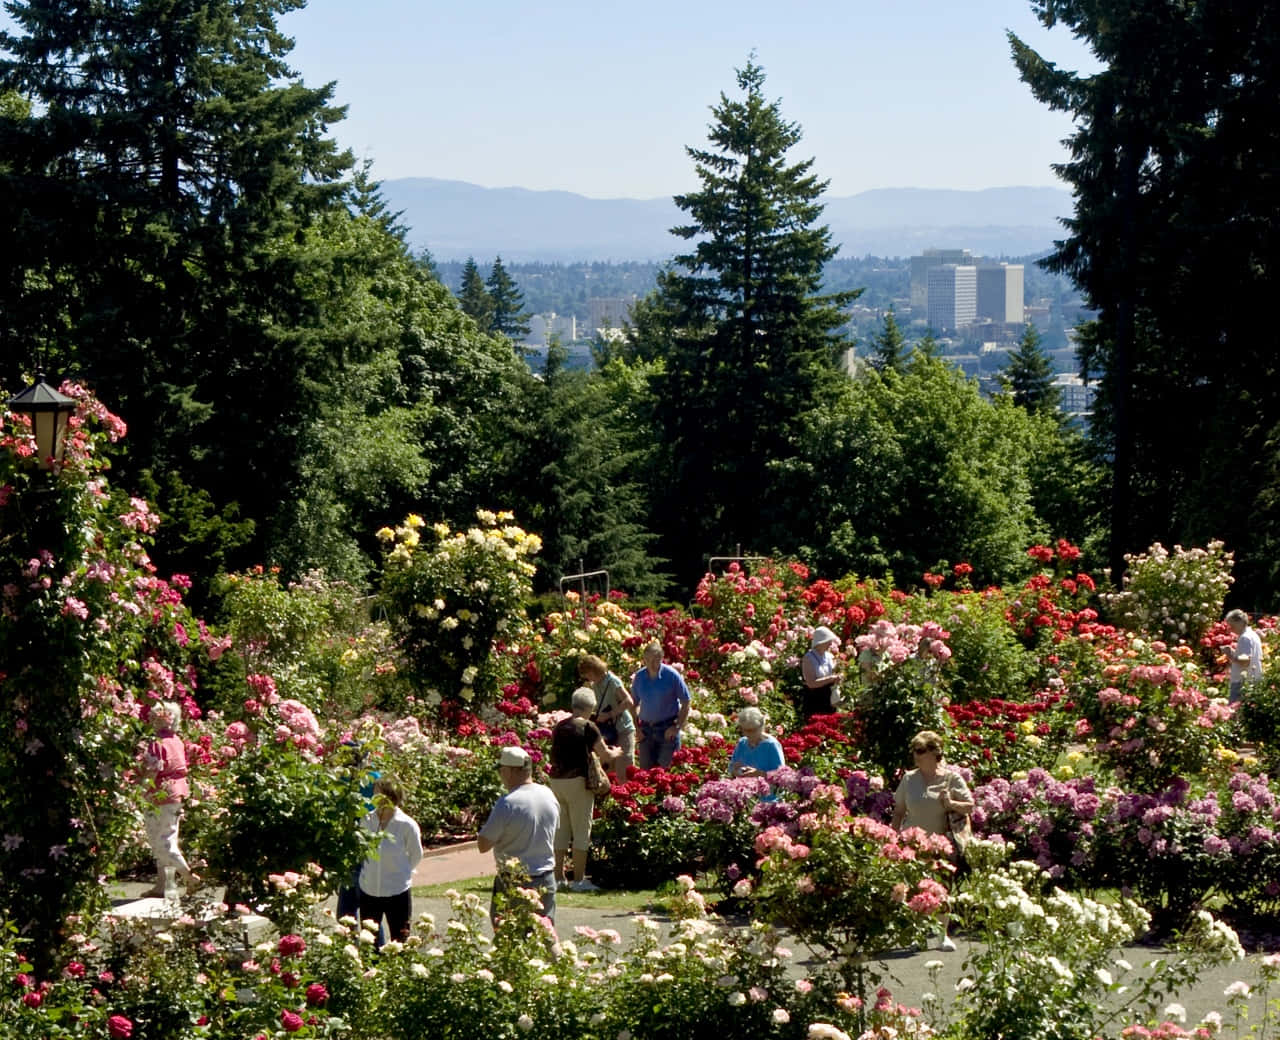 "An Alluring Rose Garden - Come Lose Yourself In Its Aromatic Beauty"